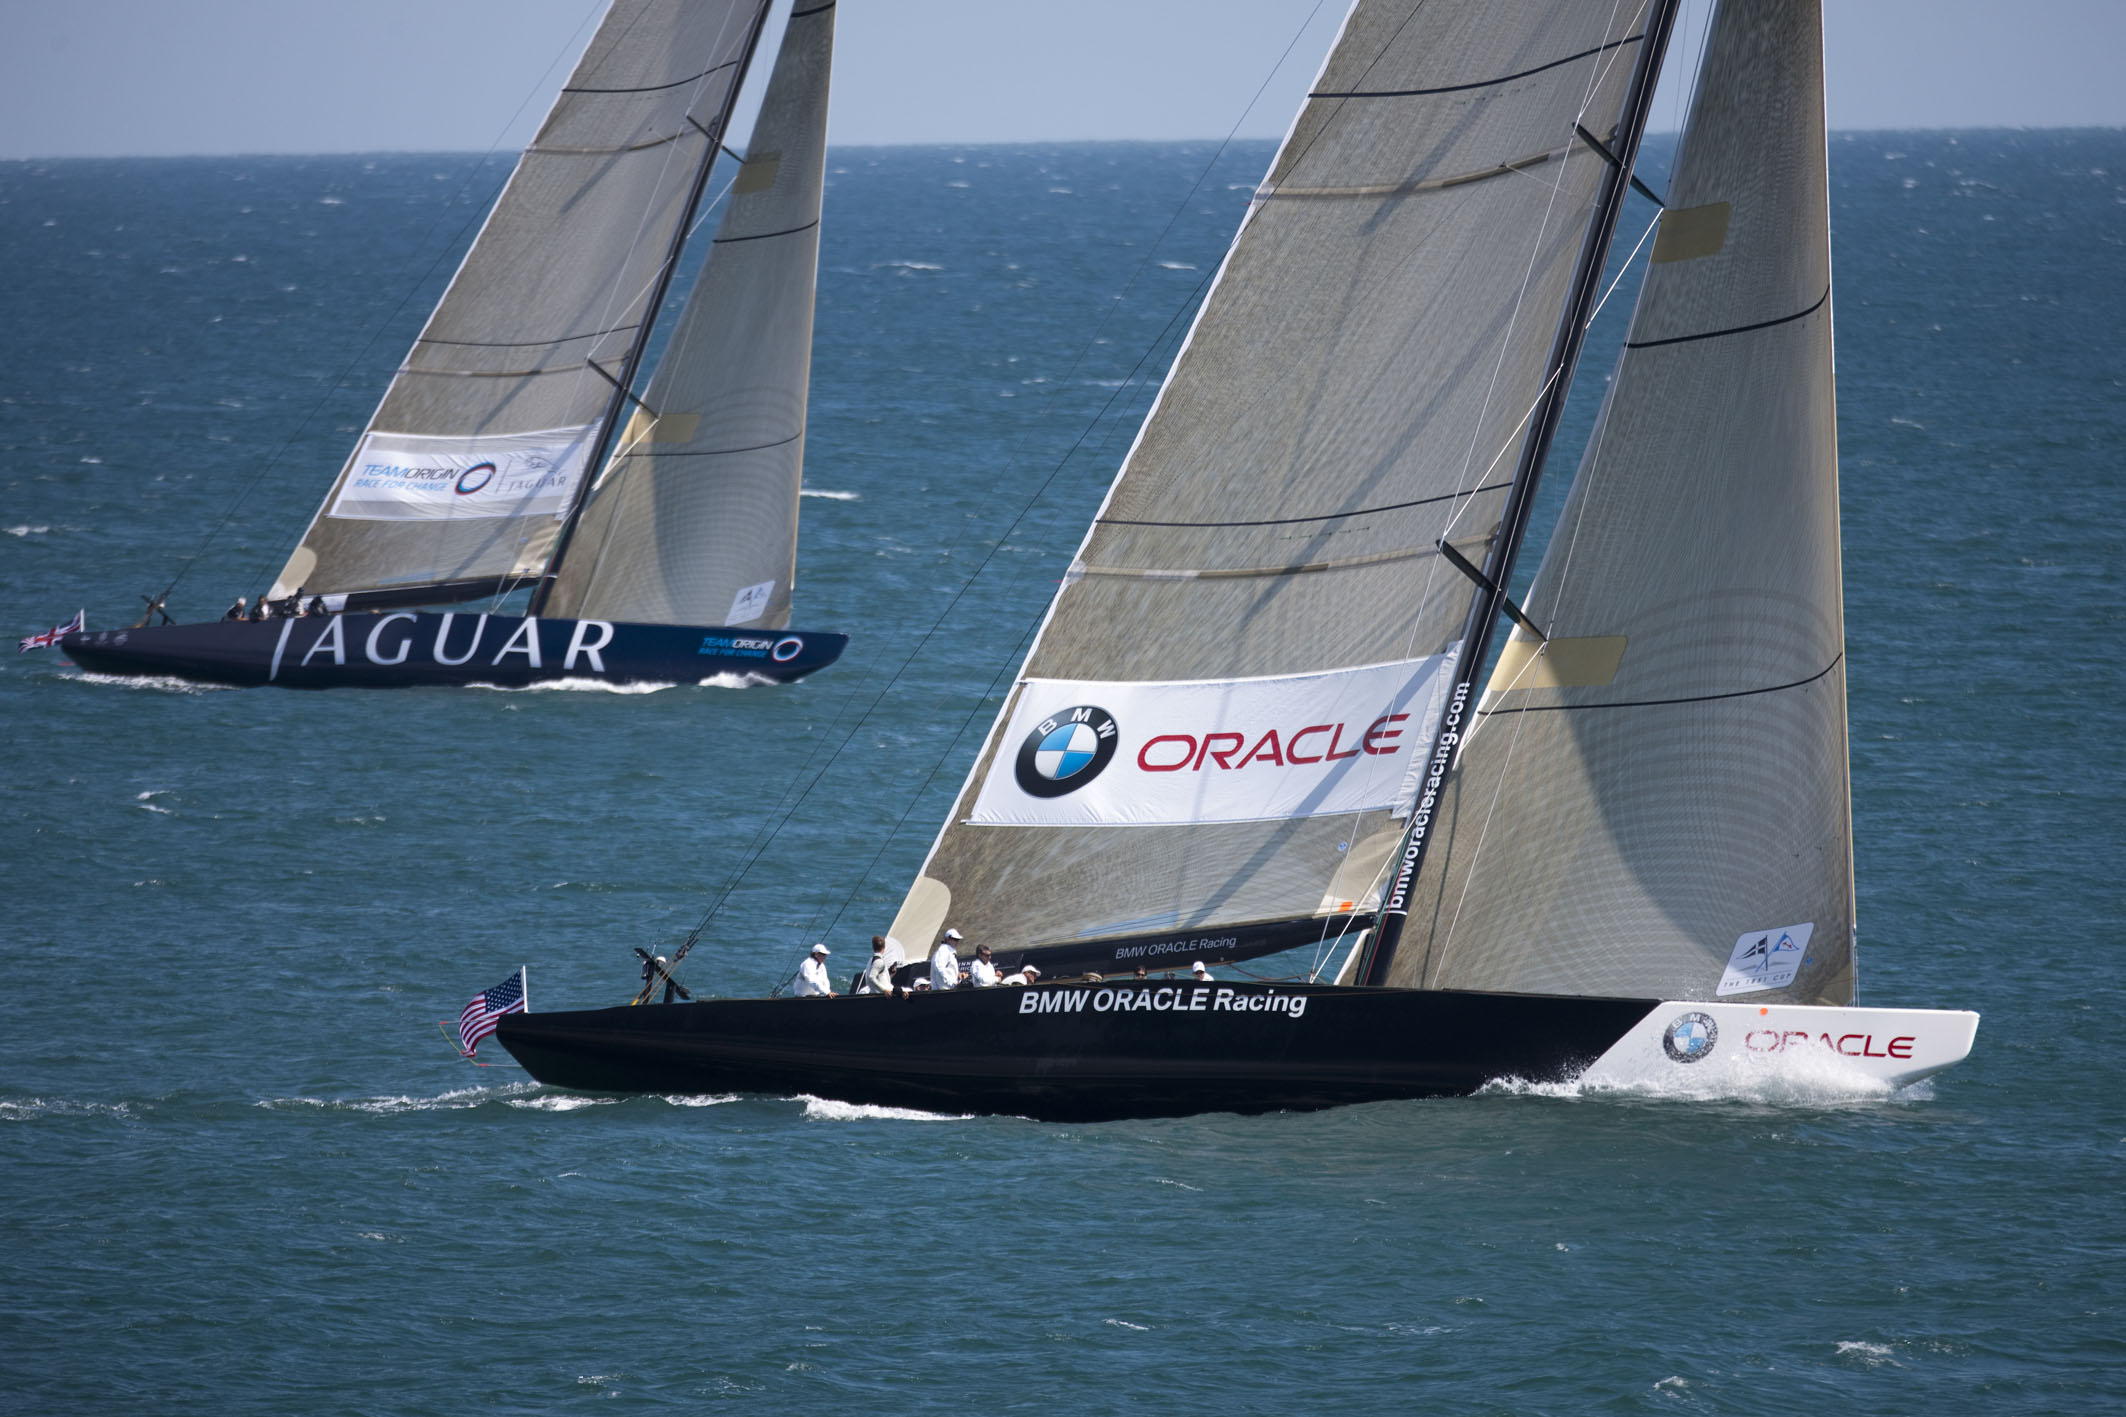 The-1851-Cup-BMW-ORACLE-Racing-Day-3-Round-the-Island-Race-Photo-Credit-Gilles-Martin-Raget-BMW-ORACLE.jpg